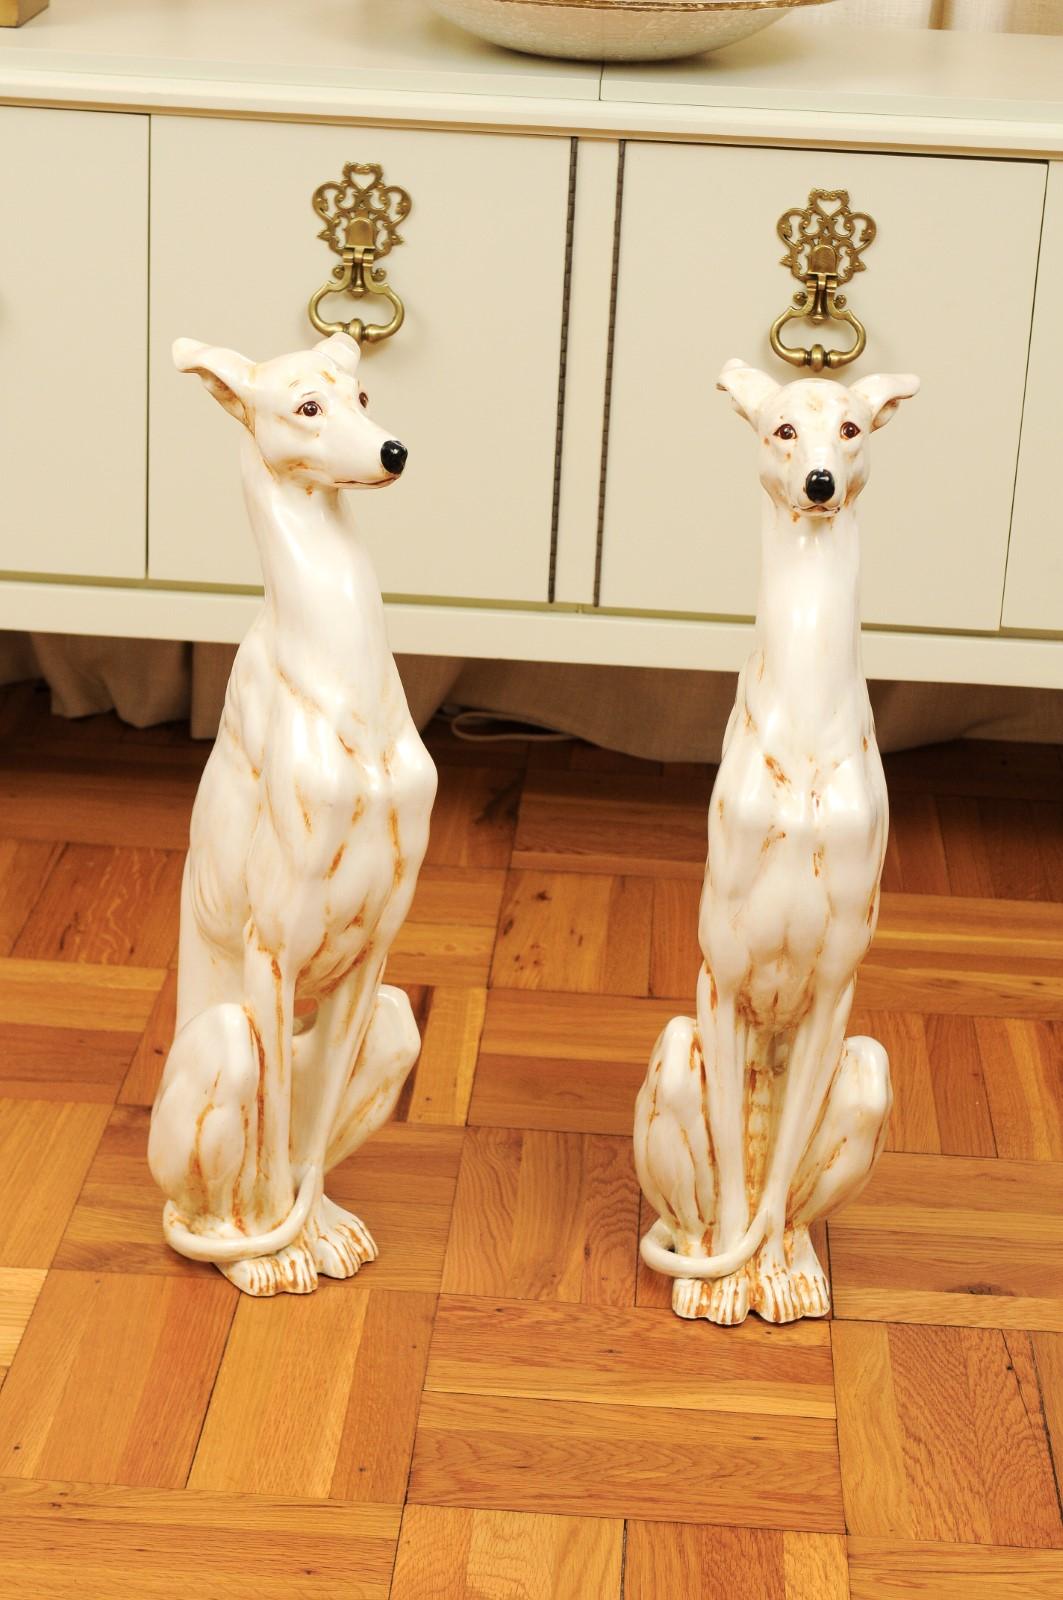 A fabulous pair of large scale ceramic Whippet sculptures, Italy, circa 1970. Beautiful hand painted form with a subtle glaze accenting the sculpture detail. Slender and dramatic with lovely facial expression. The pair have aged to absolute